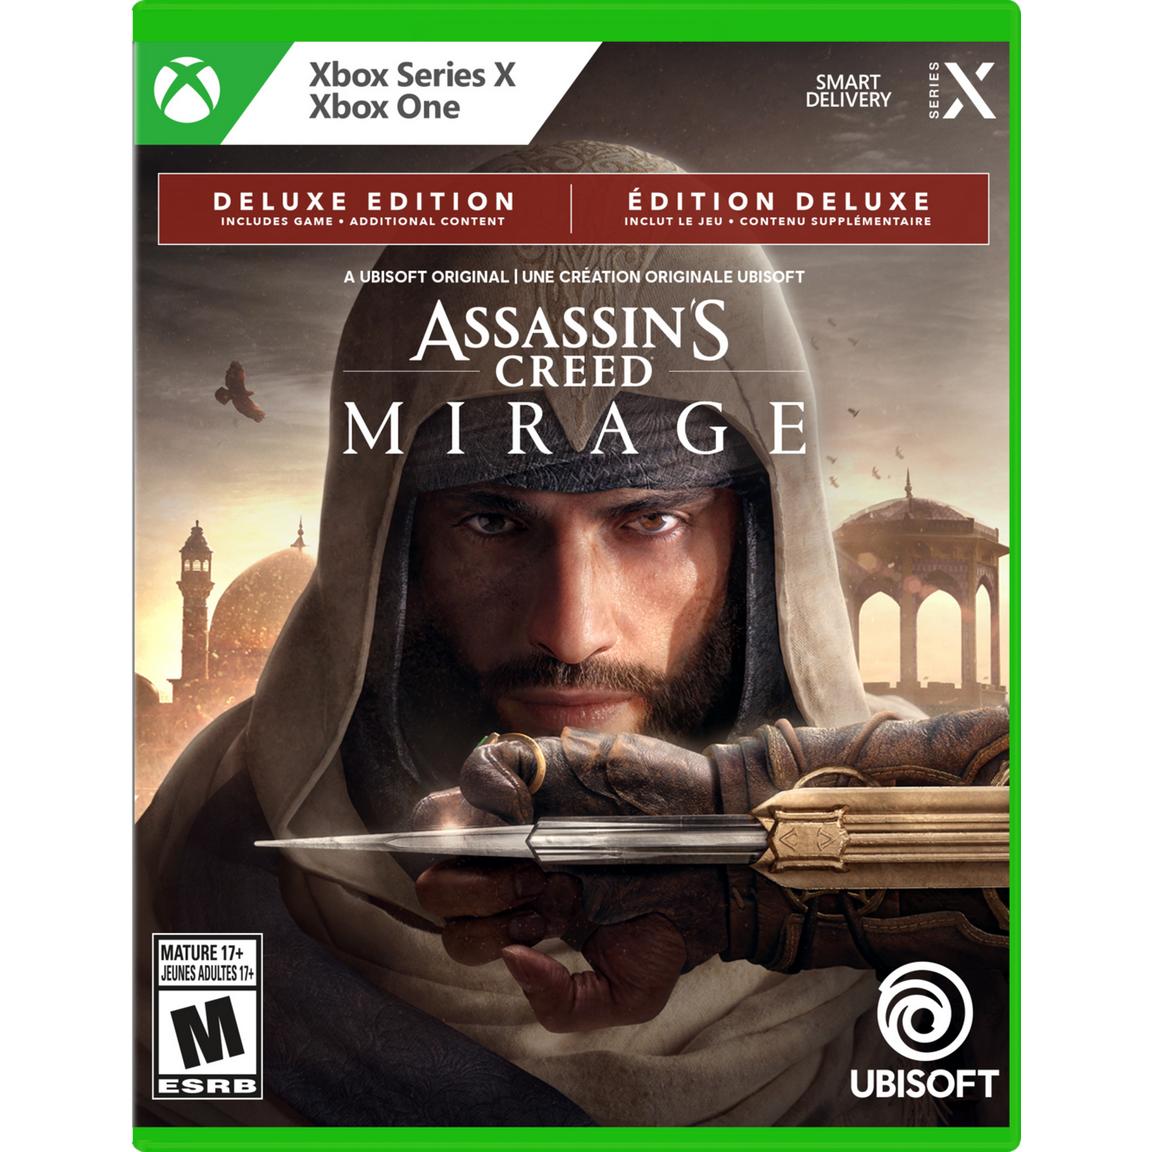 Assassin's Creed Mirage Cross-Gen - Xbox One and Xbox Series X/S